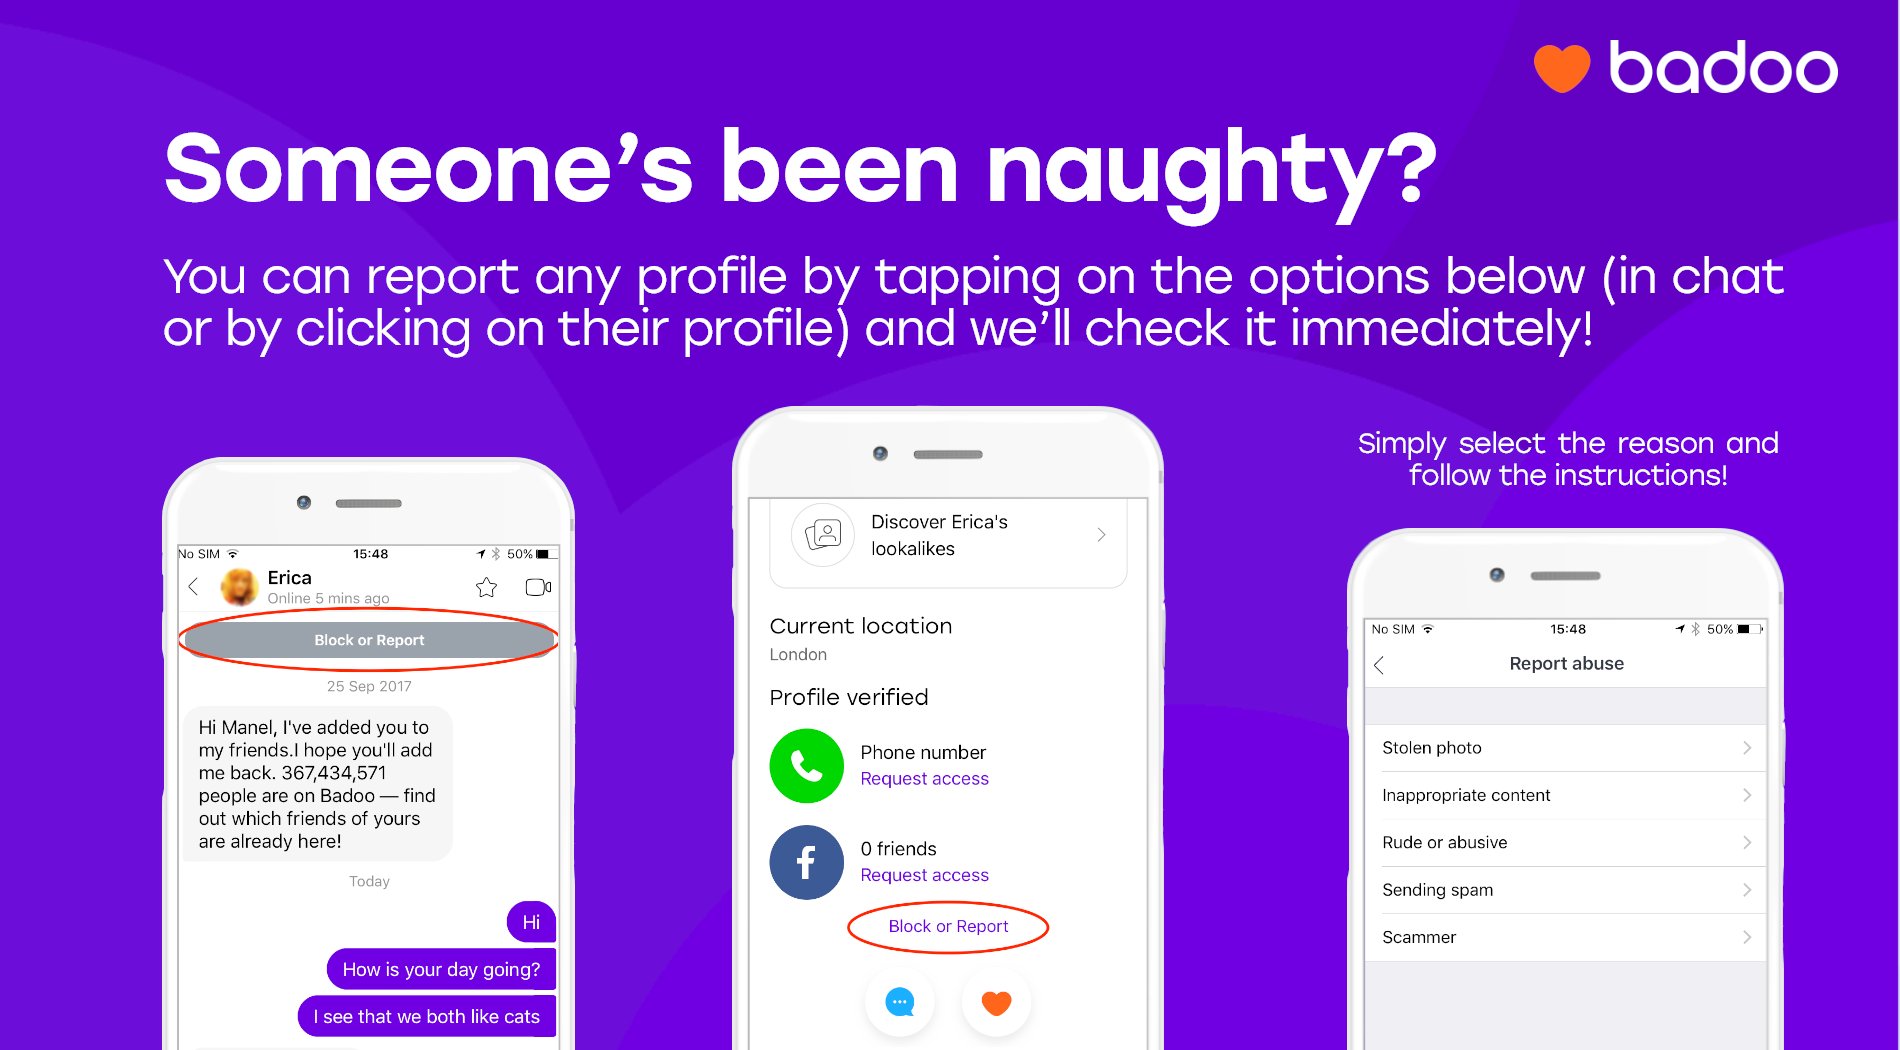 How to know who rated you badoo